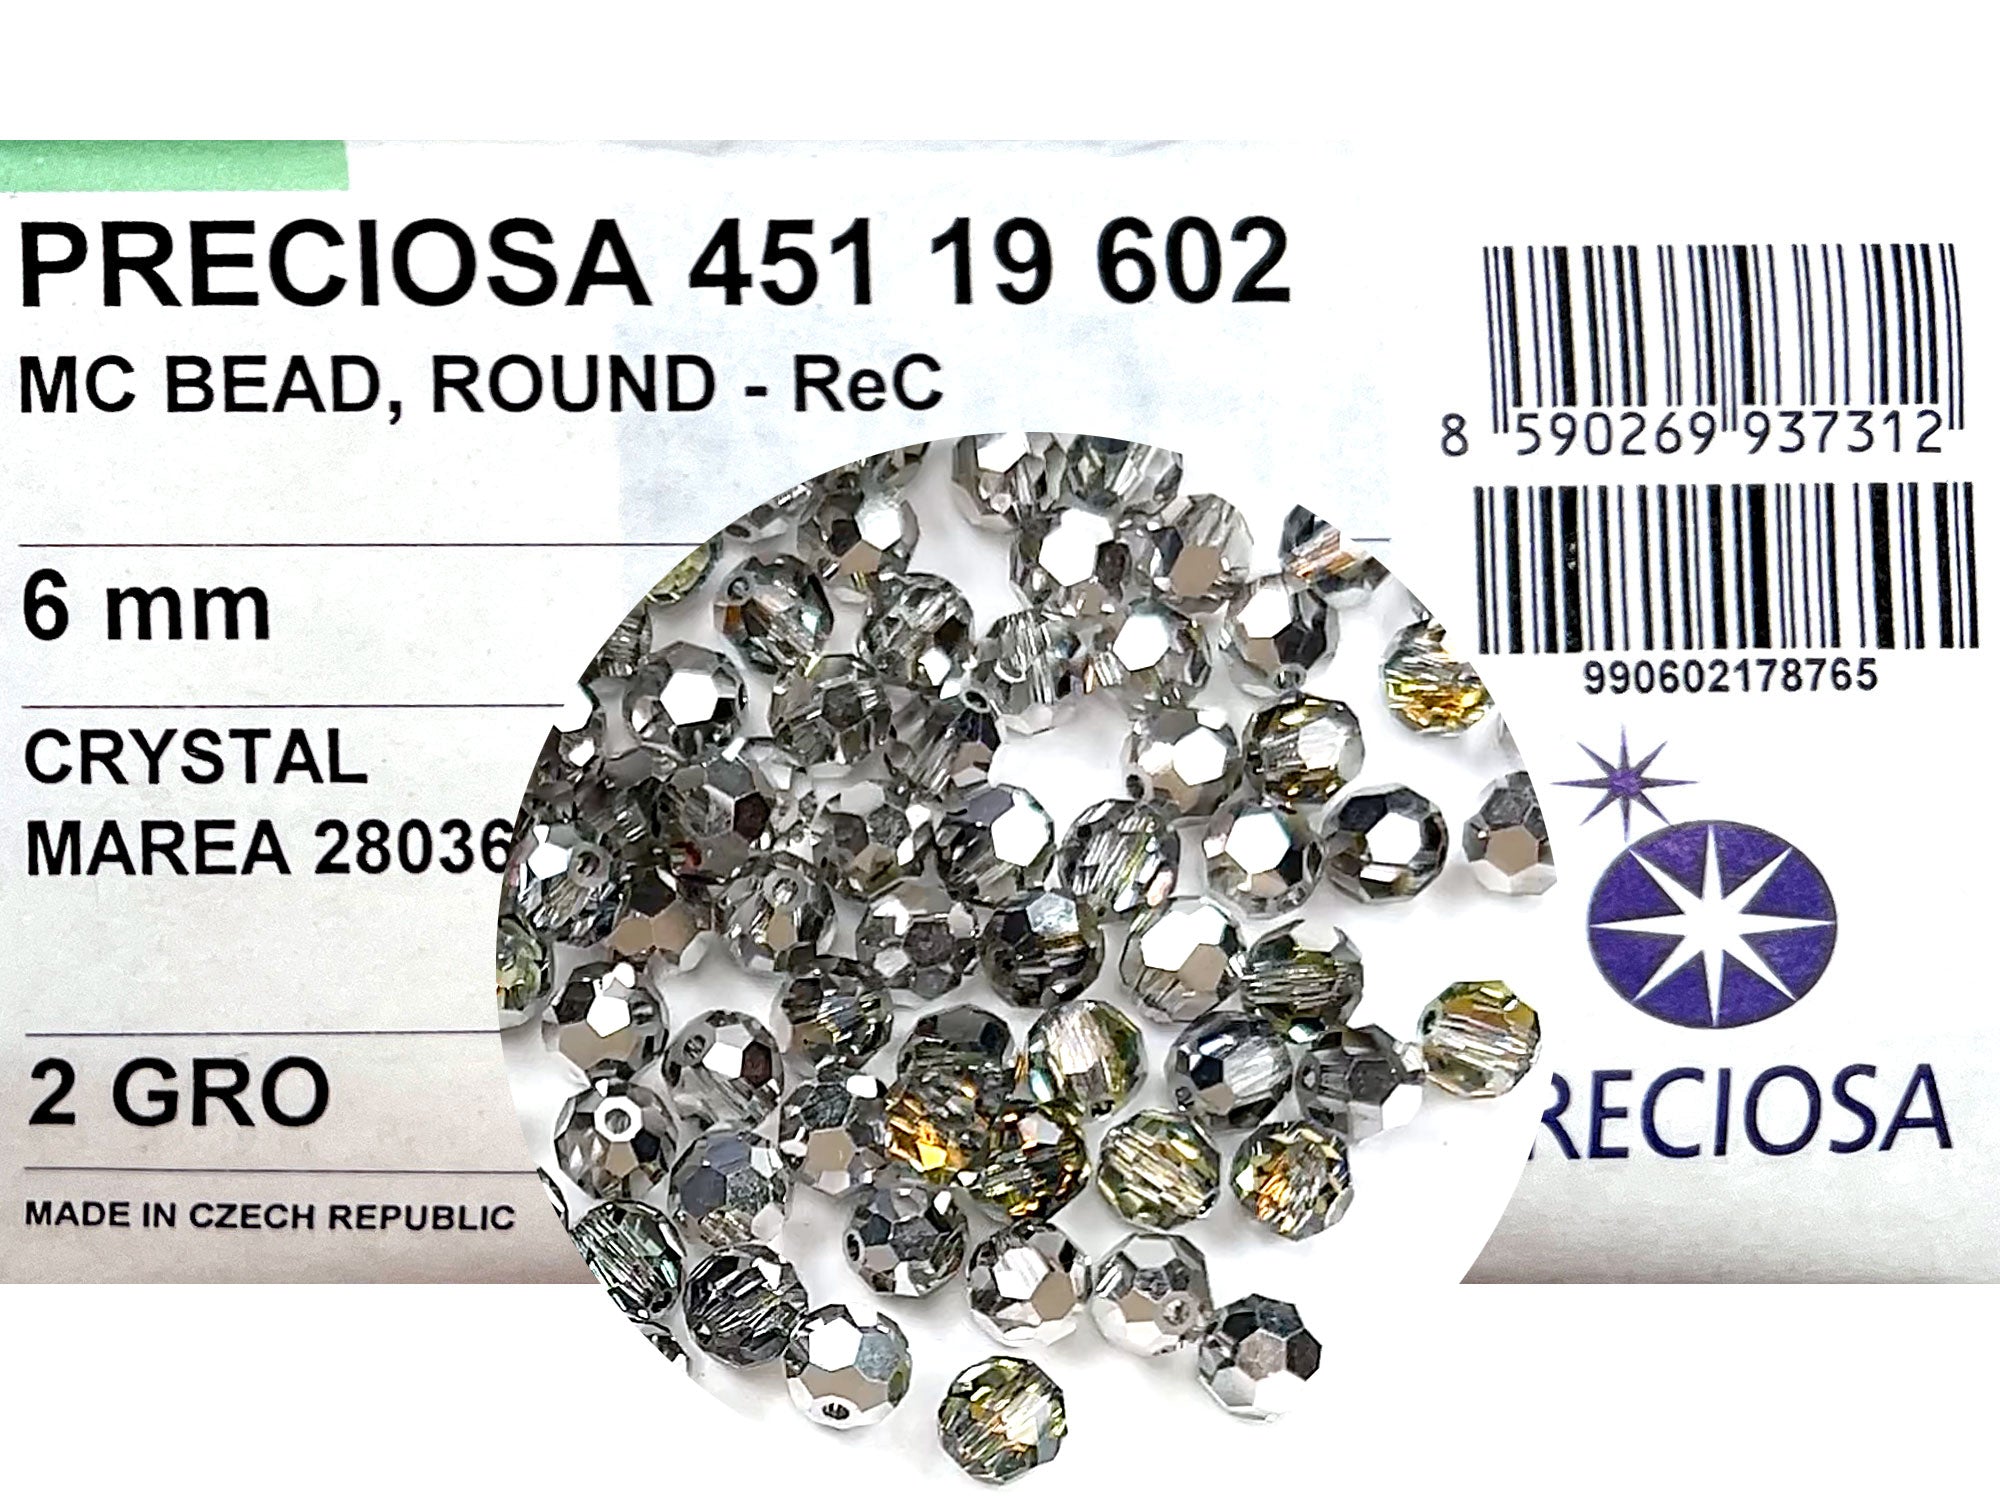 Crystal Marea Silver 28036 coated Czech Machine Cut Round Crystal Beads sizes 6mm and 8mm rosary size clear crystals coated with outside Silver and inside Marea reflection